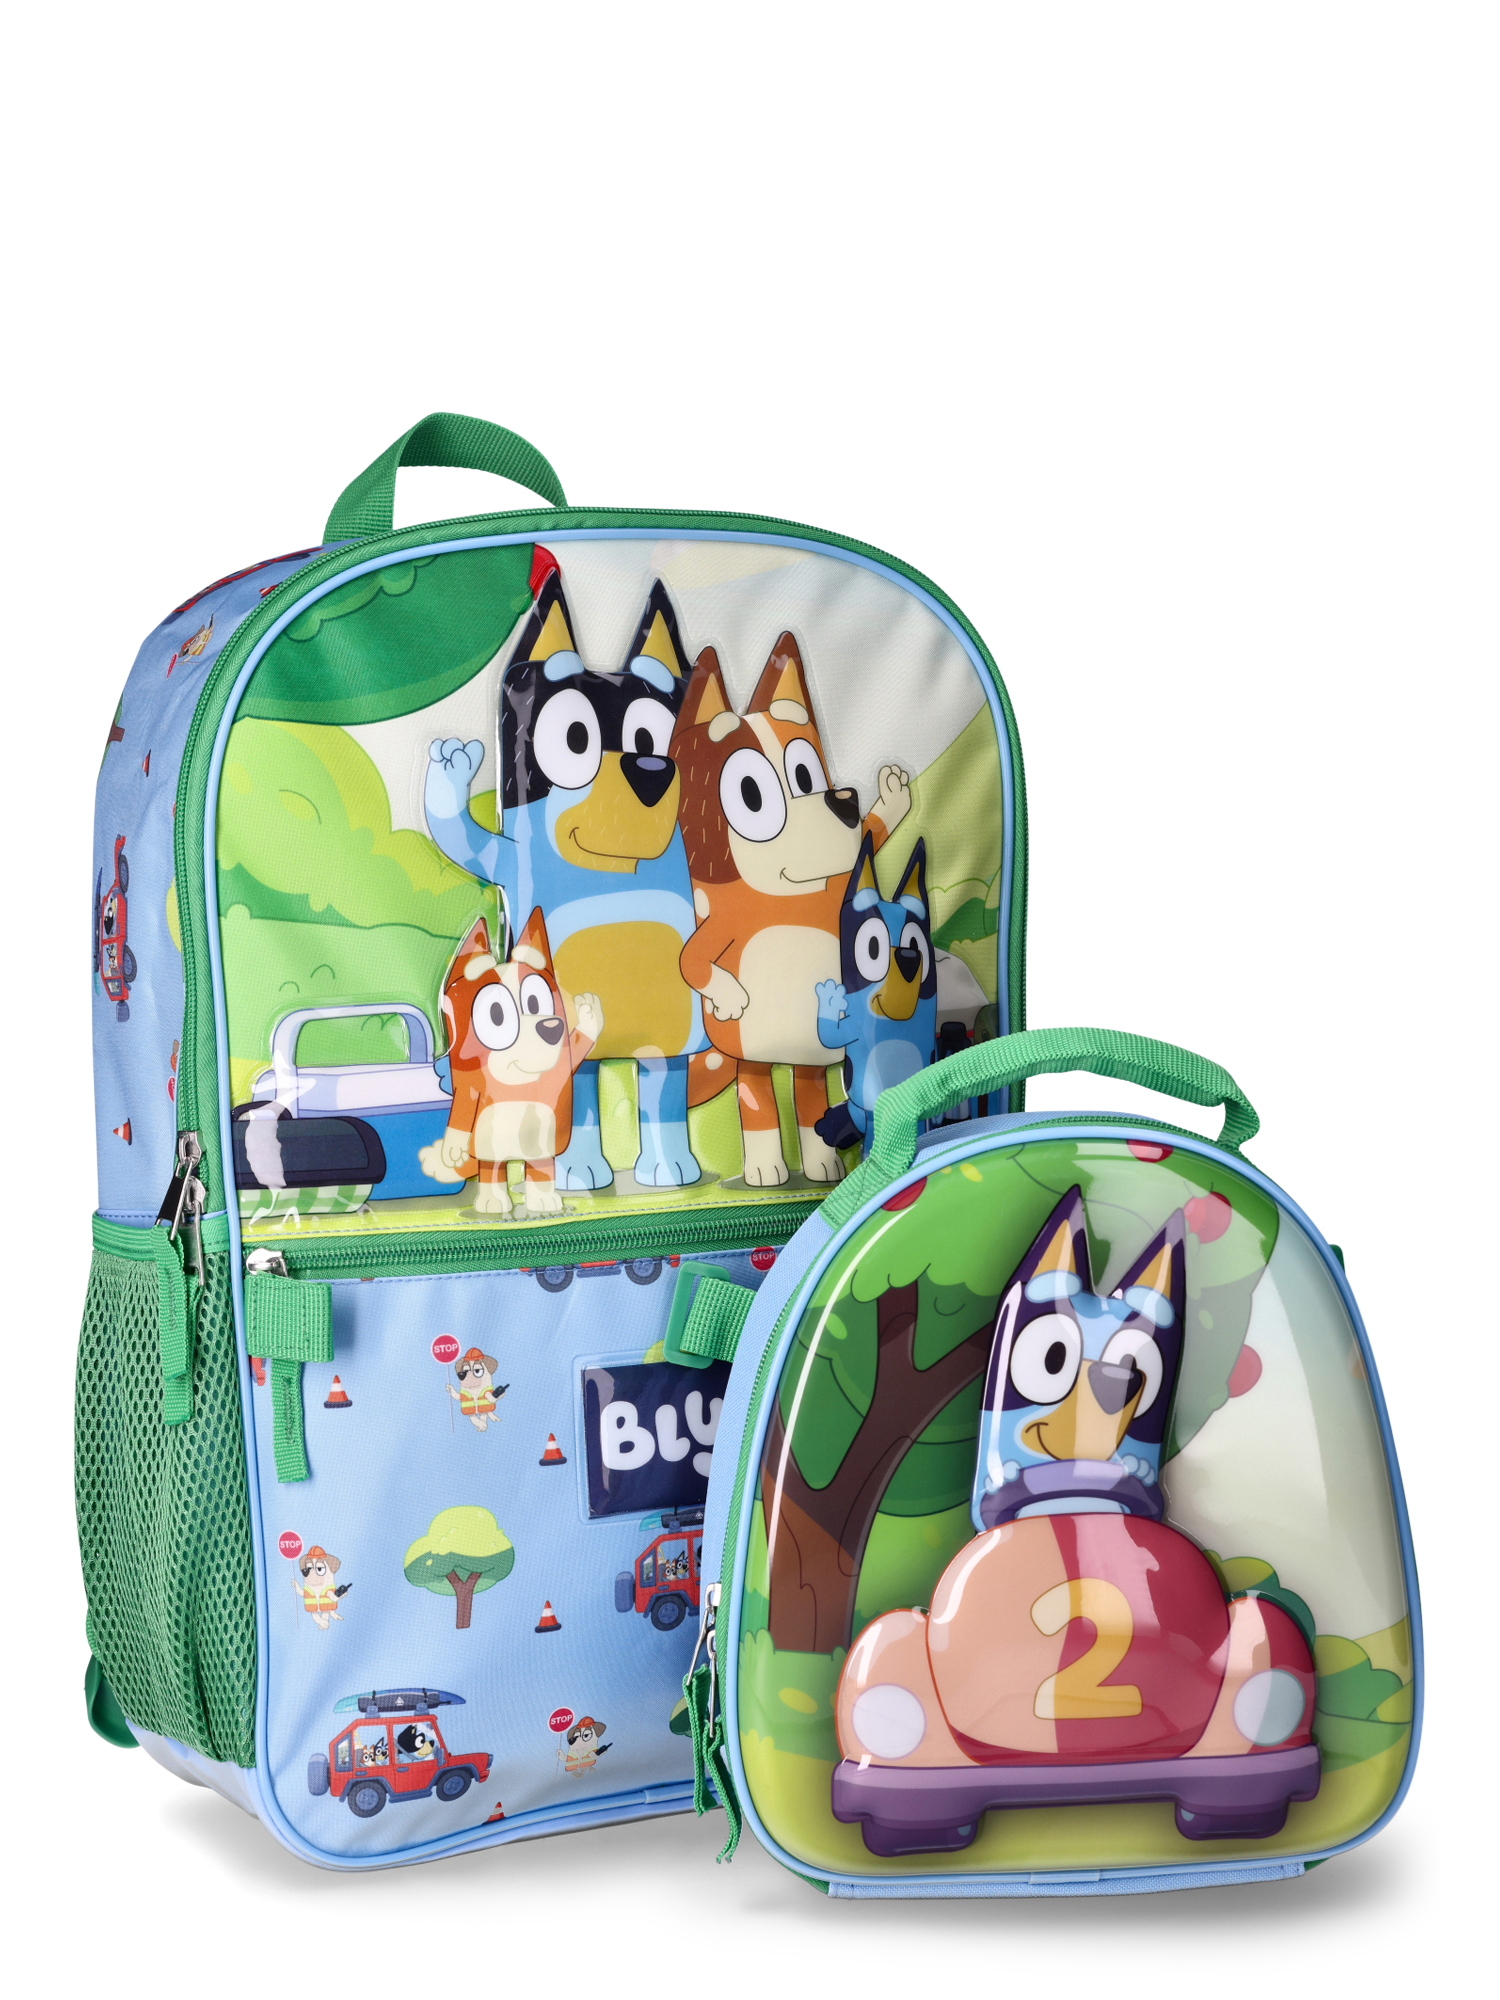 BBC Bluey Family Trip Children’s Laptop Backpack with Lunch Bag, 2-Piece Set - image 1 of 8